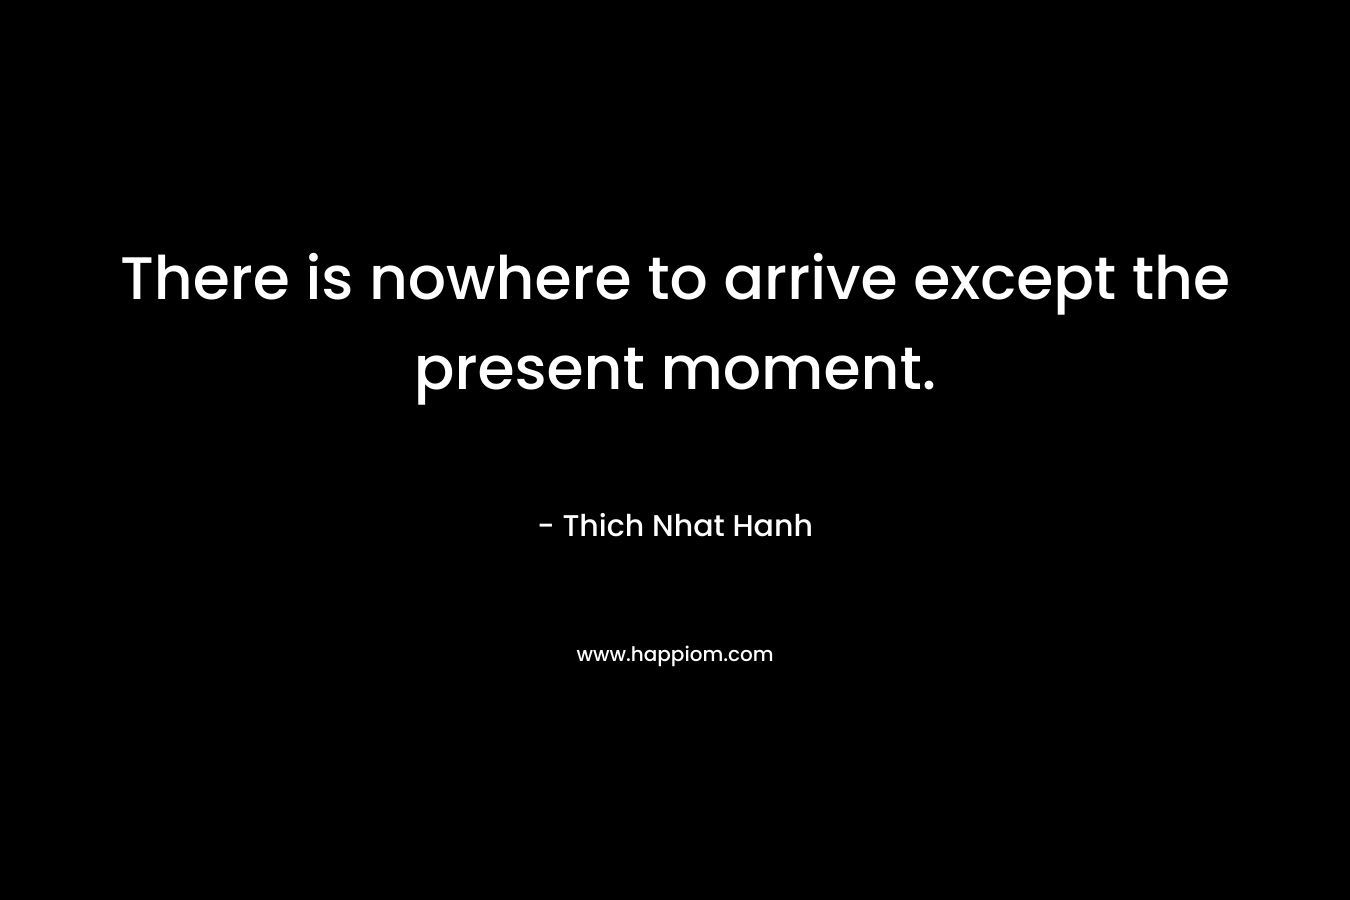 There is nowhere to arrive except the present moment.